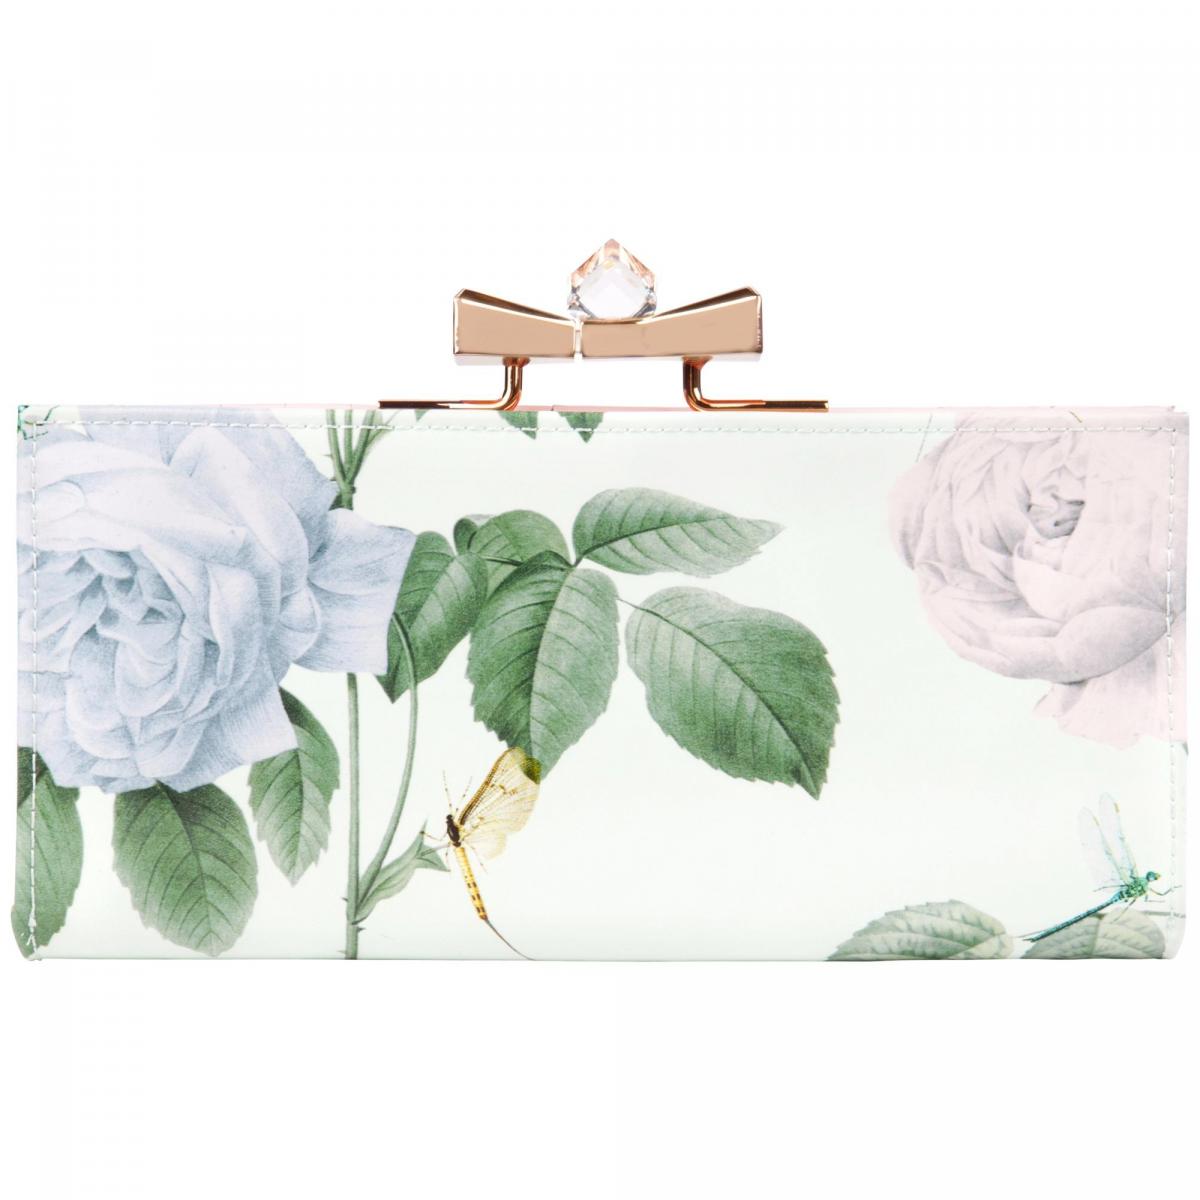 Ted Baker in John Lewis,  Maryah Matine leather purse, mint, £89